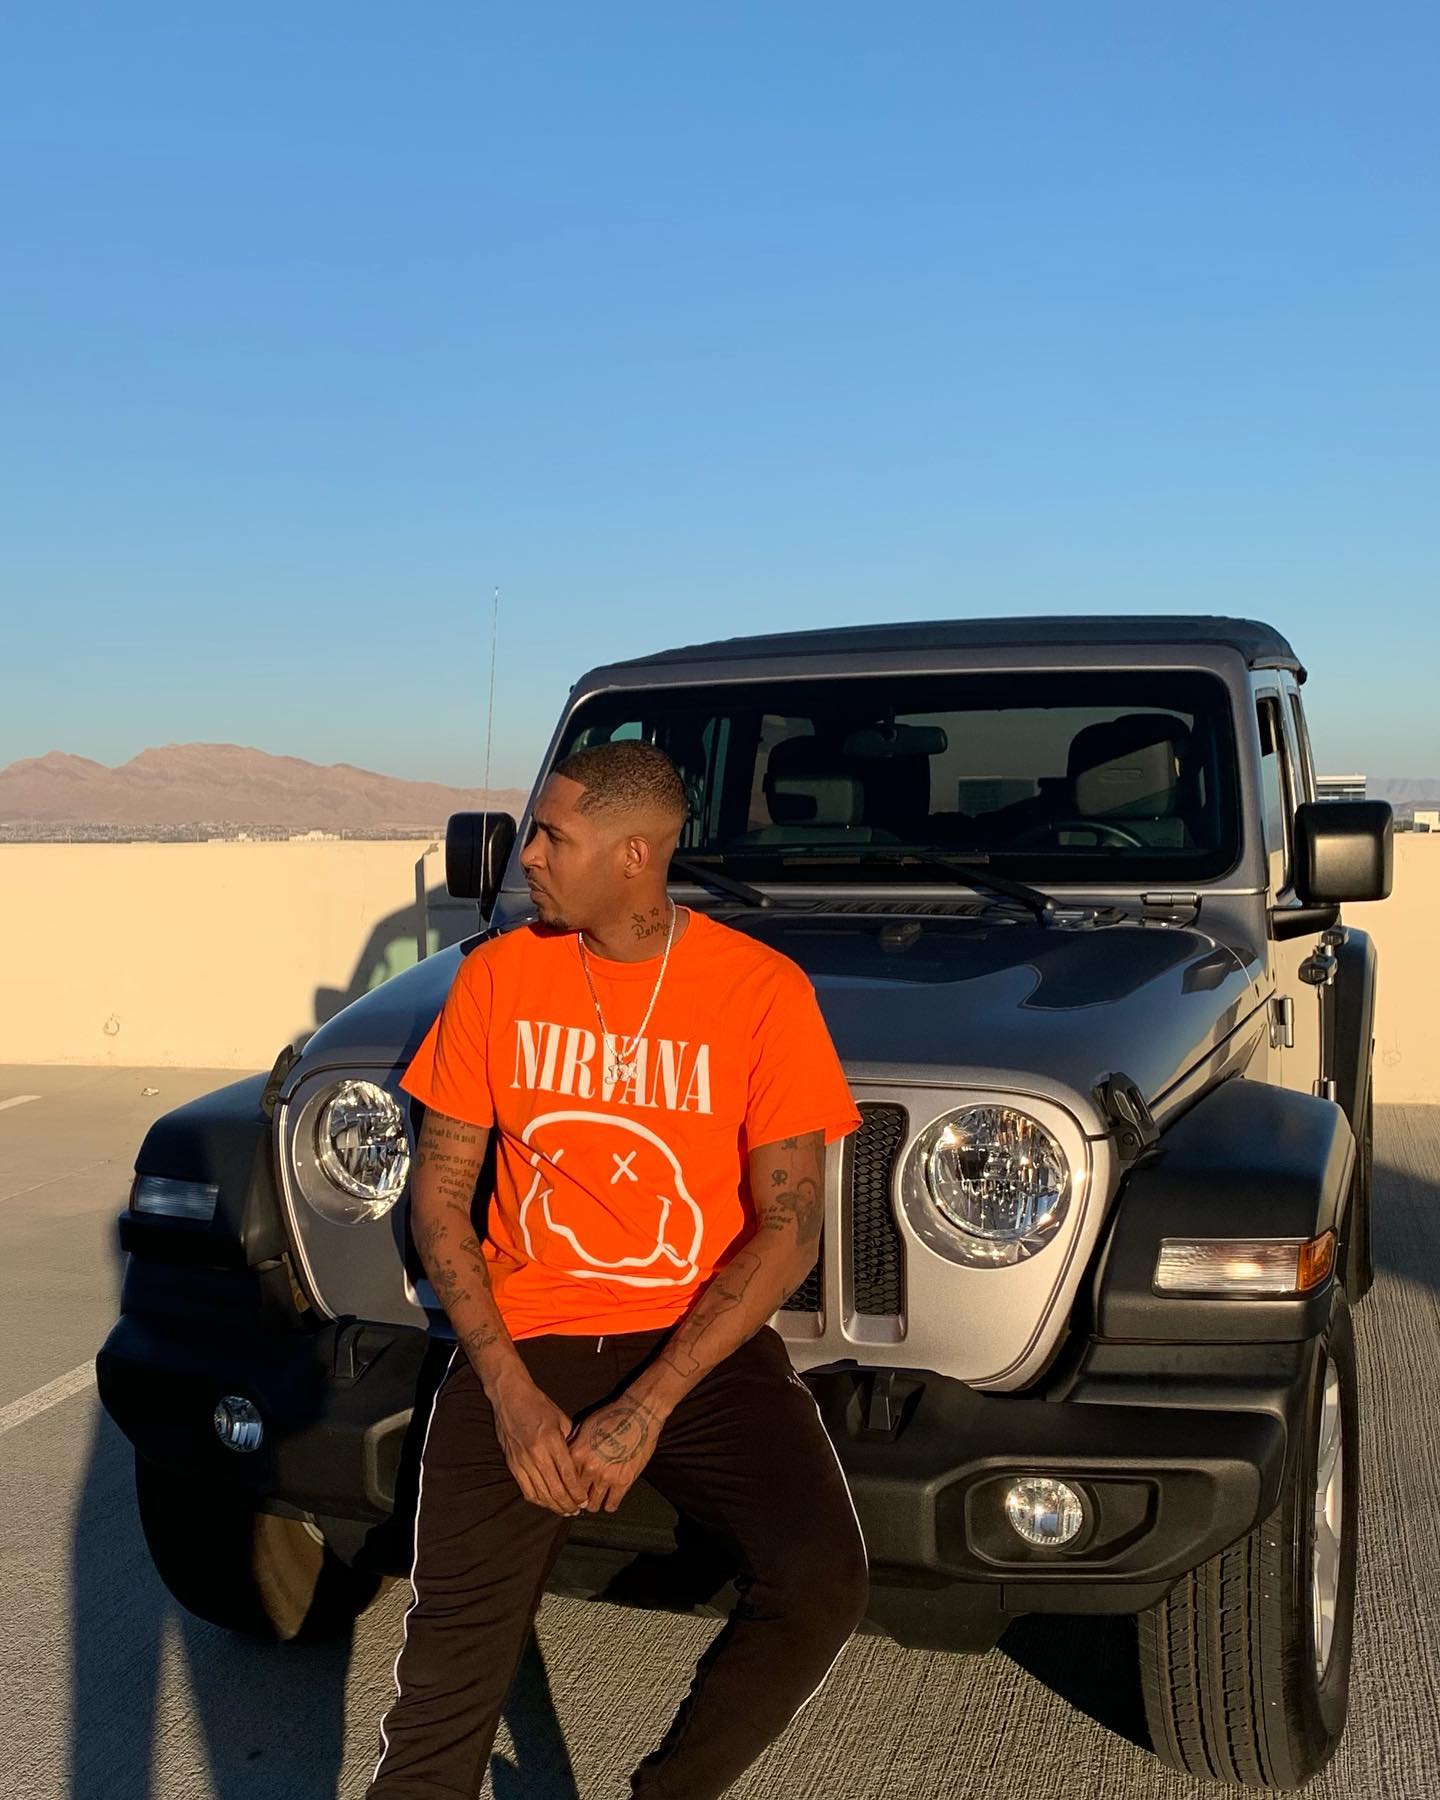 TALK TO ME ON ALL PLATFORMS AT Midnight! Show some support like you support other strangers lol
•
•
•
#jahanx #talktome #handsome #newsong #chill #vibes #weekend #saturday #goodtimes #jeep #bayarea #lasvegas #fit #spotify #applemusic #lookgoodfeelgood